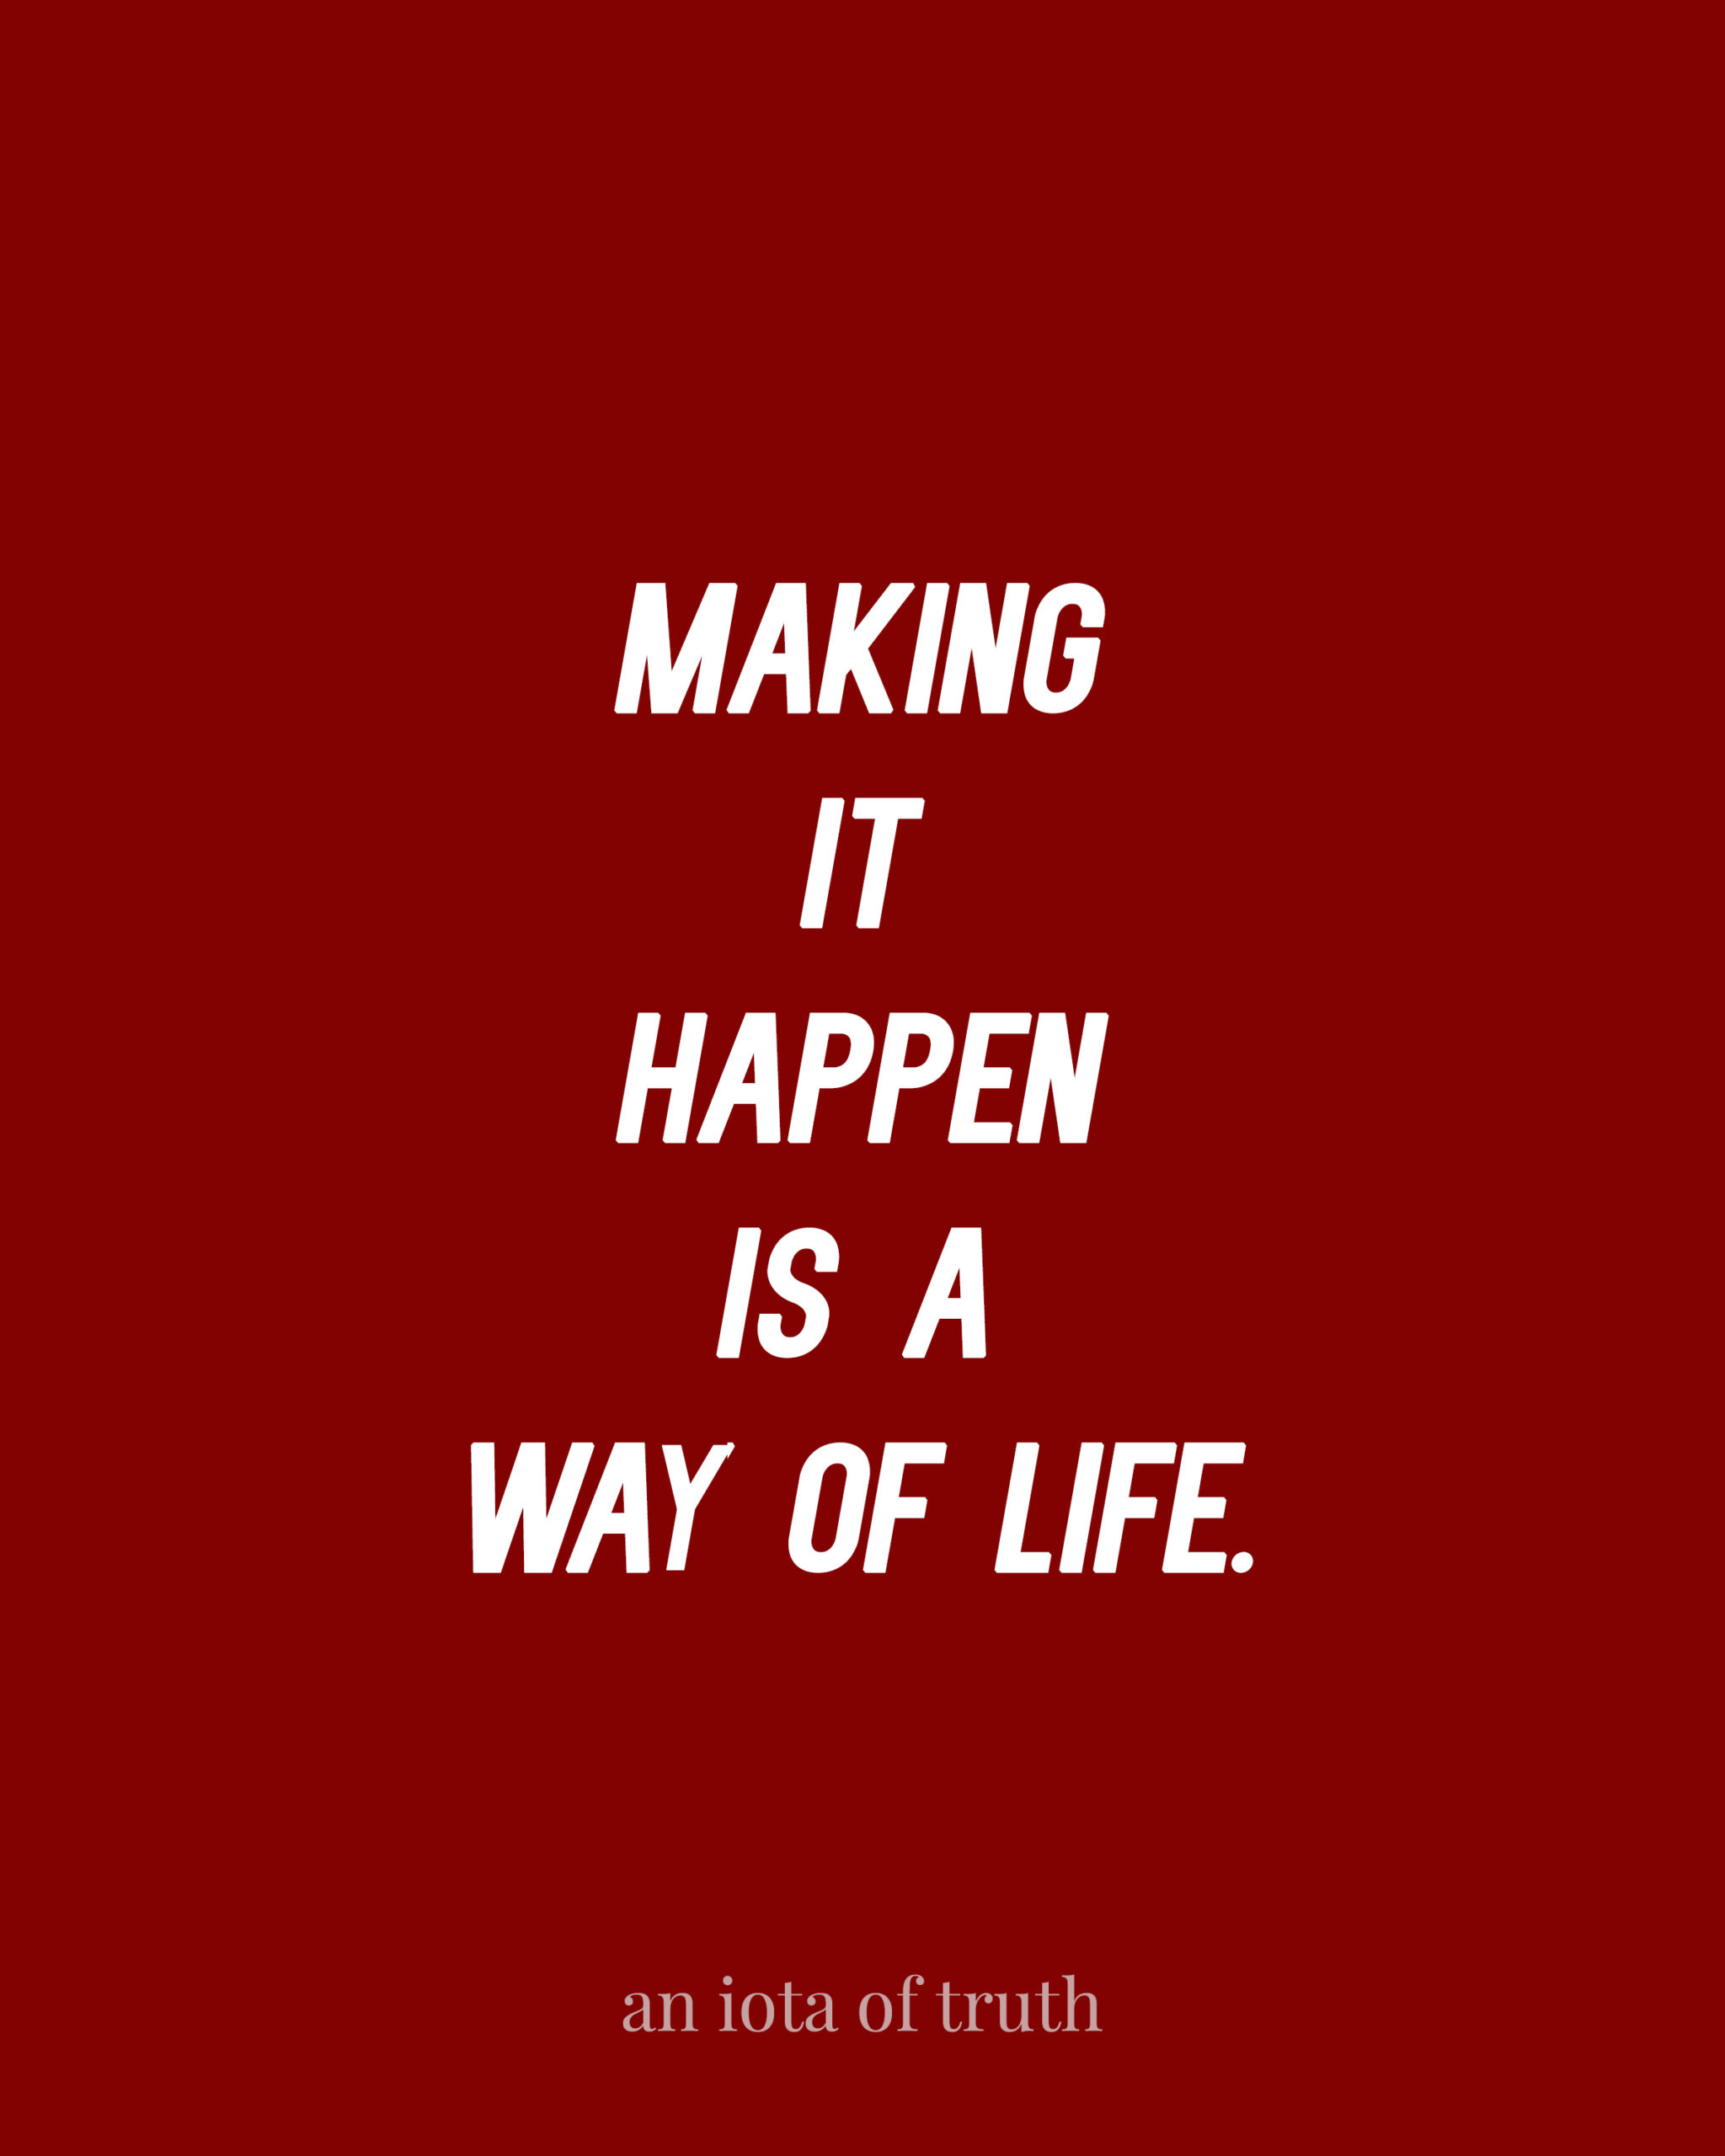 Making it happen is a way of life.